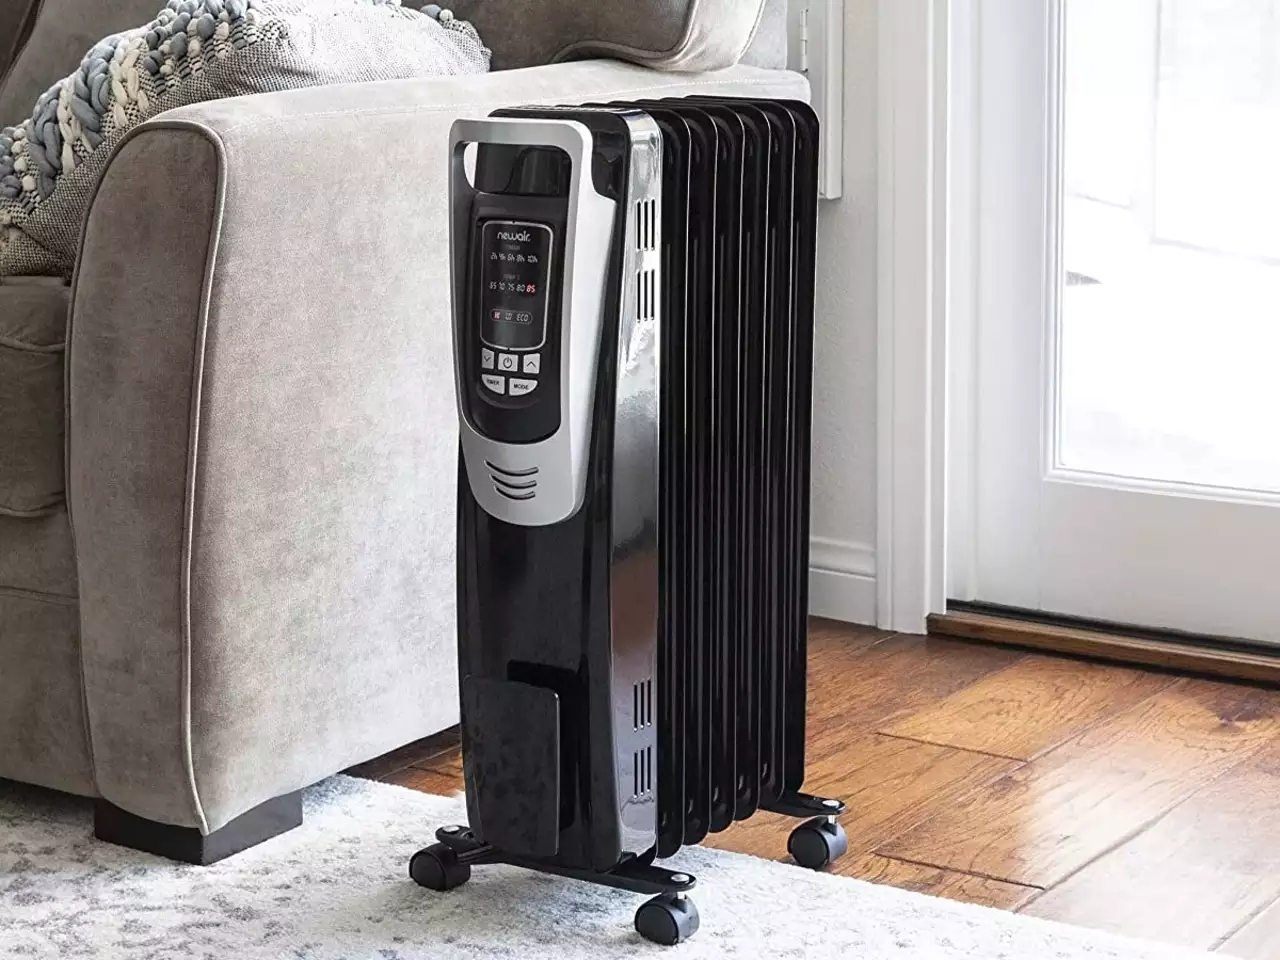 Black portable heater on wooden floor - efficient heating with diathermic oil